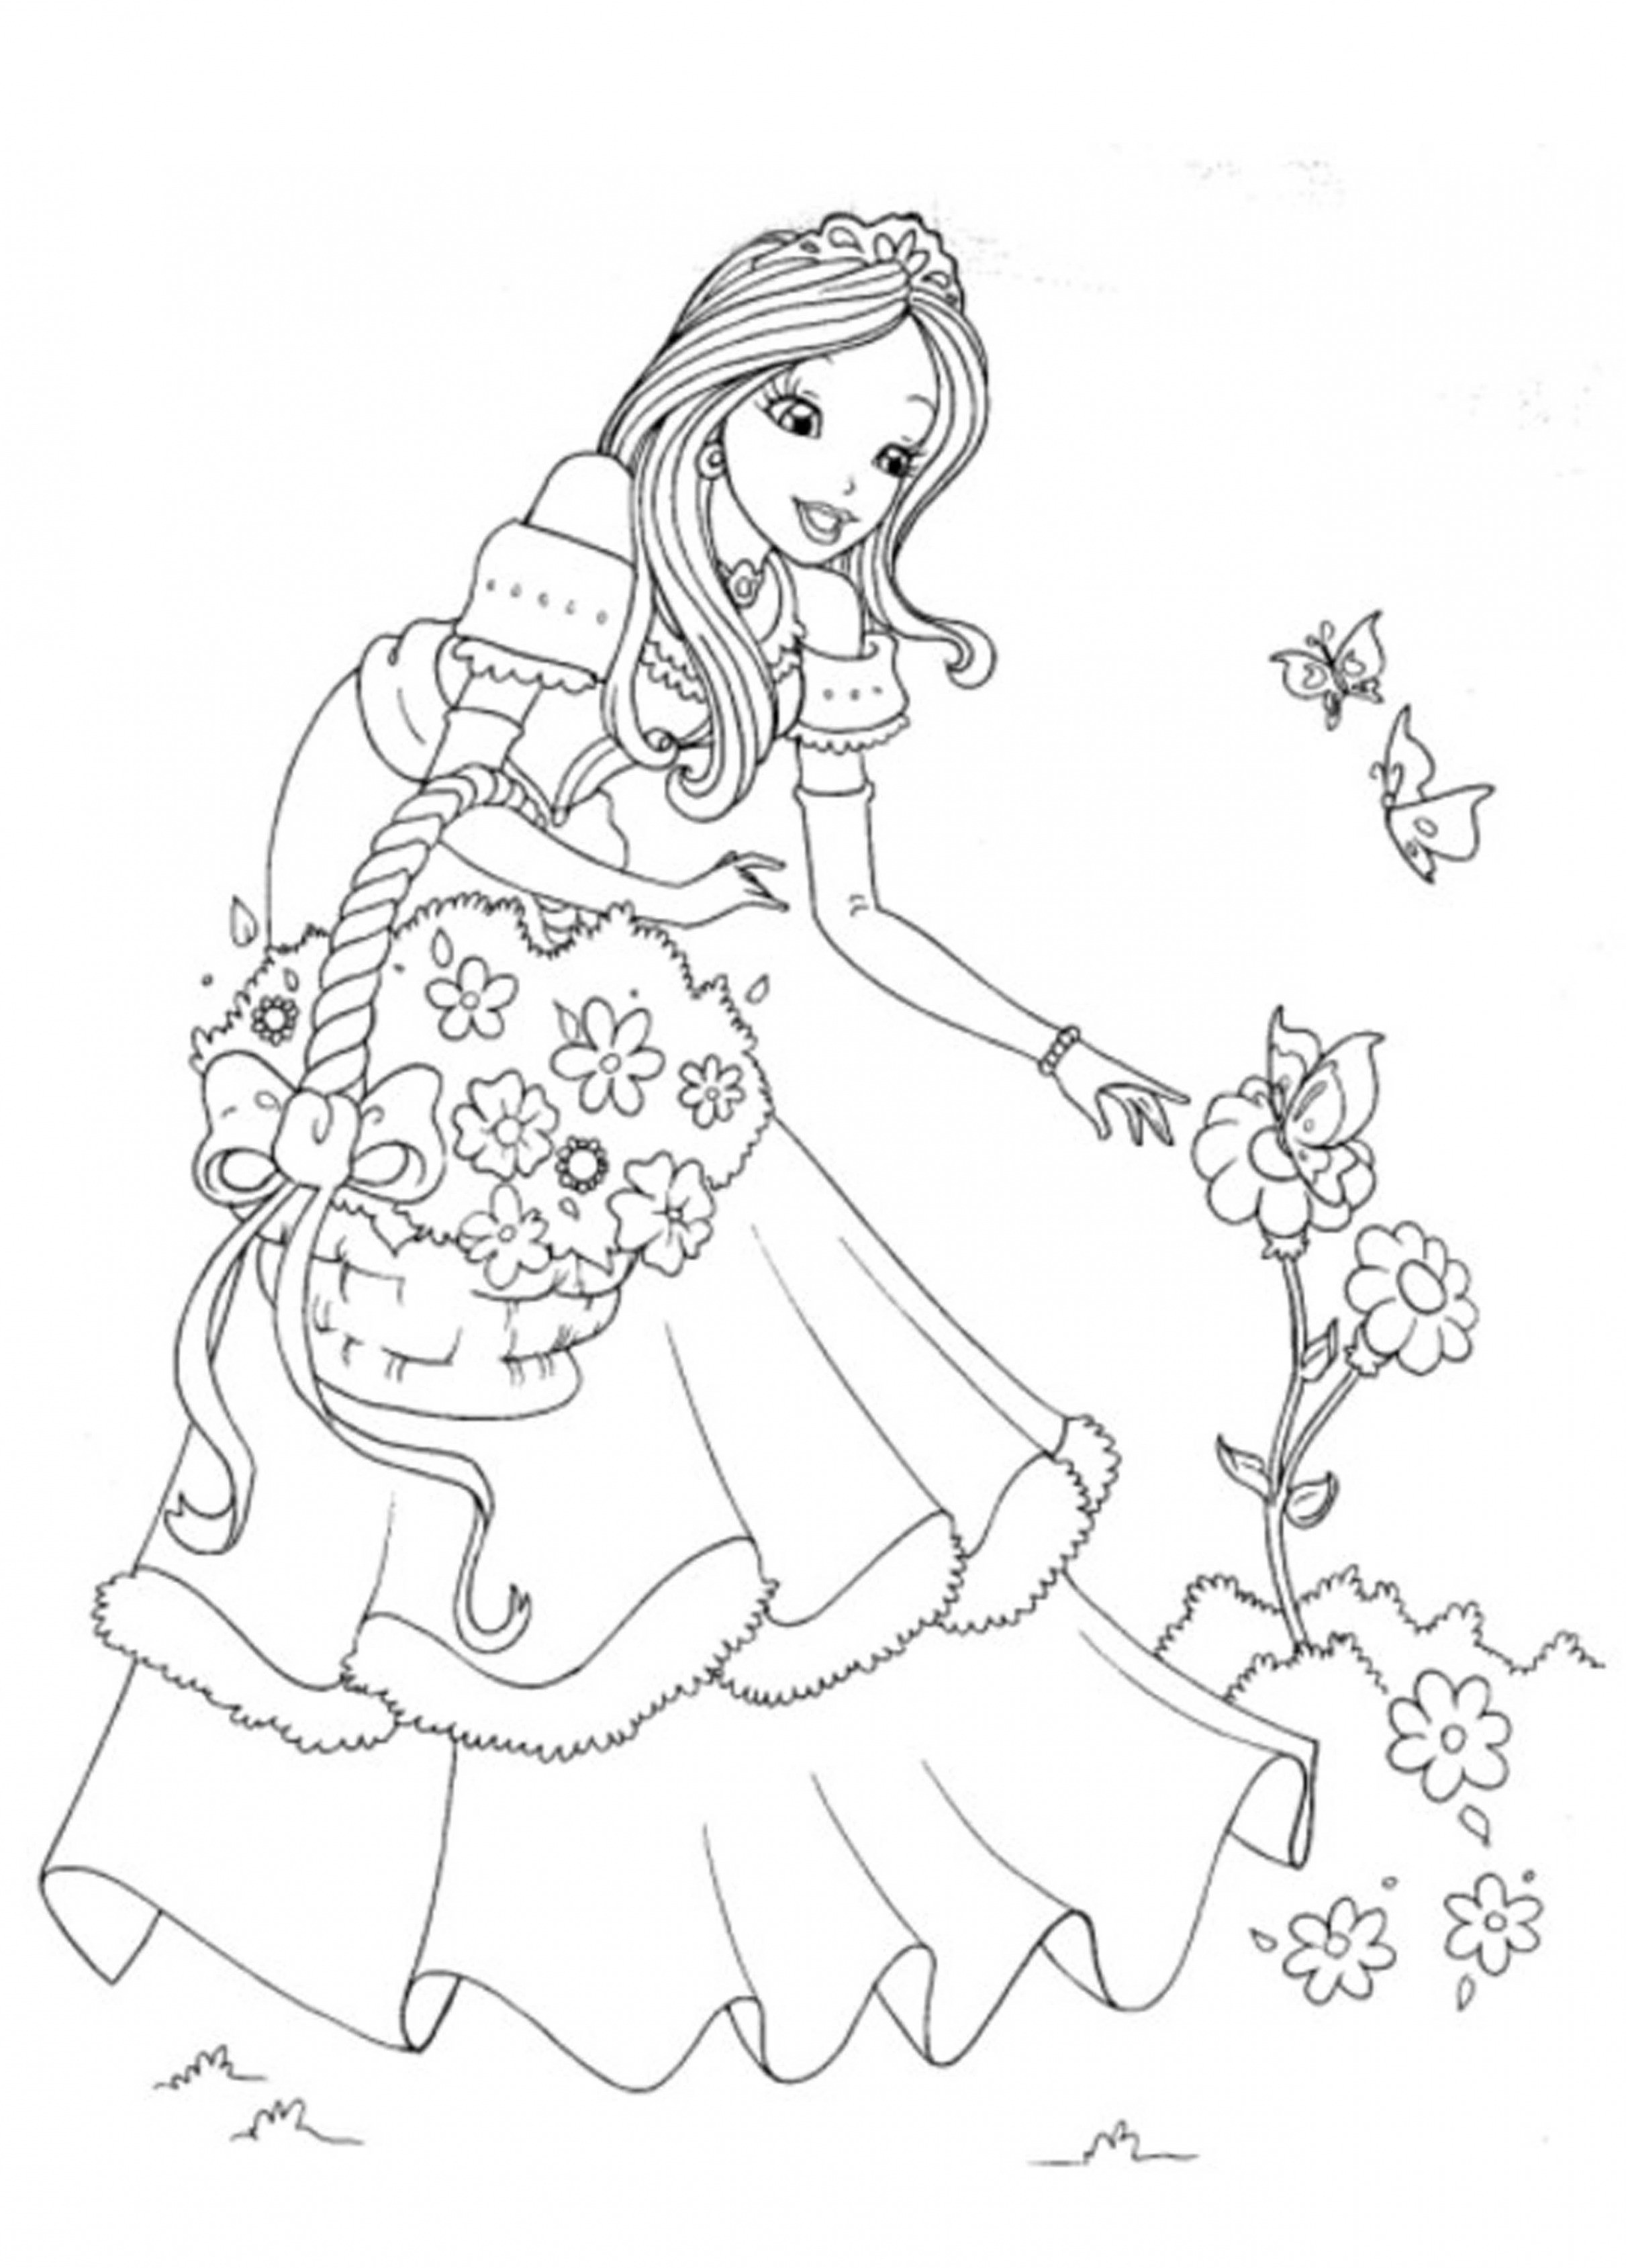 Printable Princess Coloring Page Download Luxury 28 Collection Non Disney Princess Coloring Pages Z3s